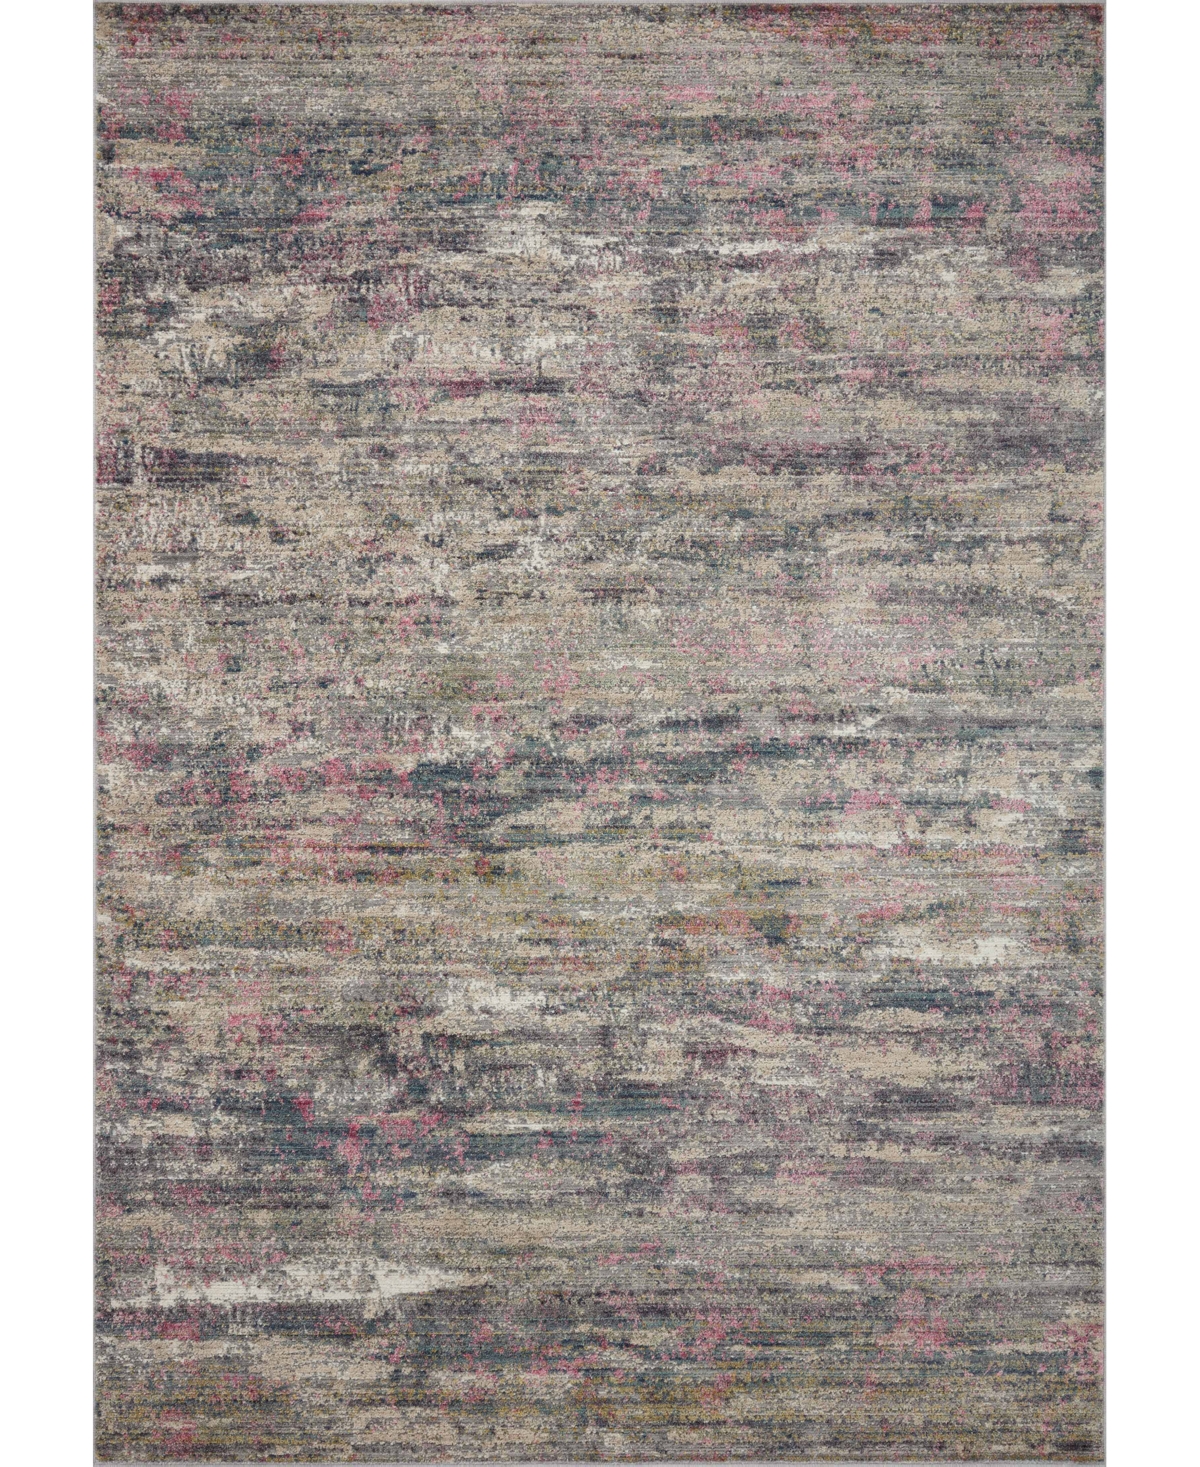 Loloi Arden Ard-05 11'6in x 15'6in Area Rug - Pink, Multi